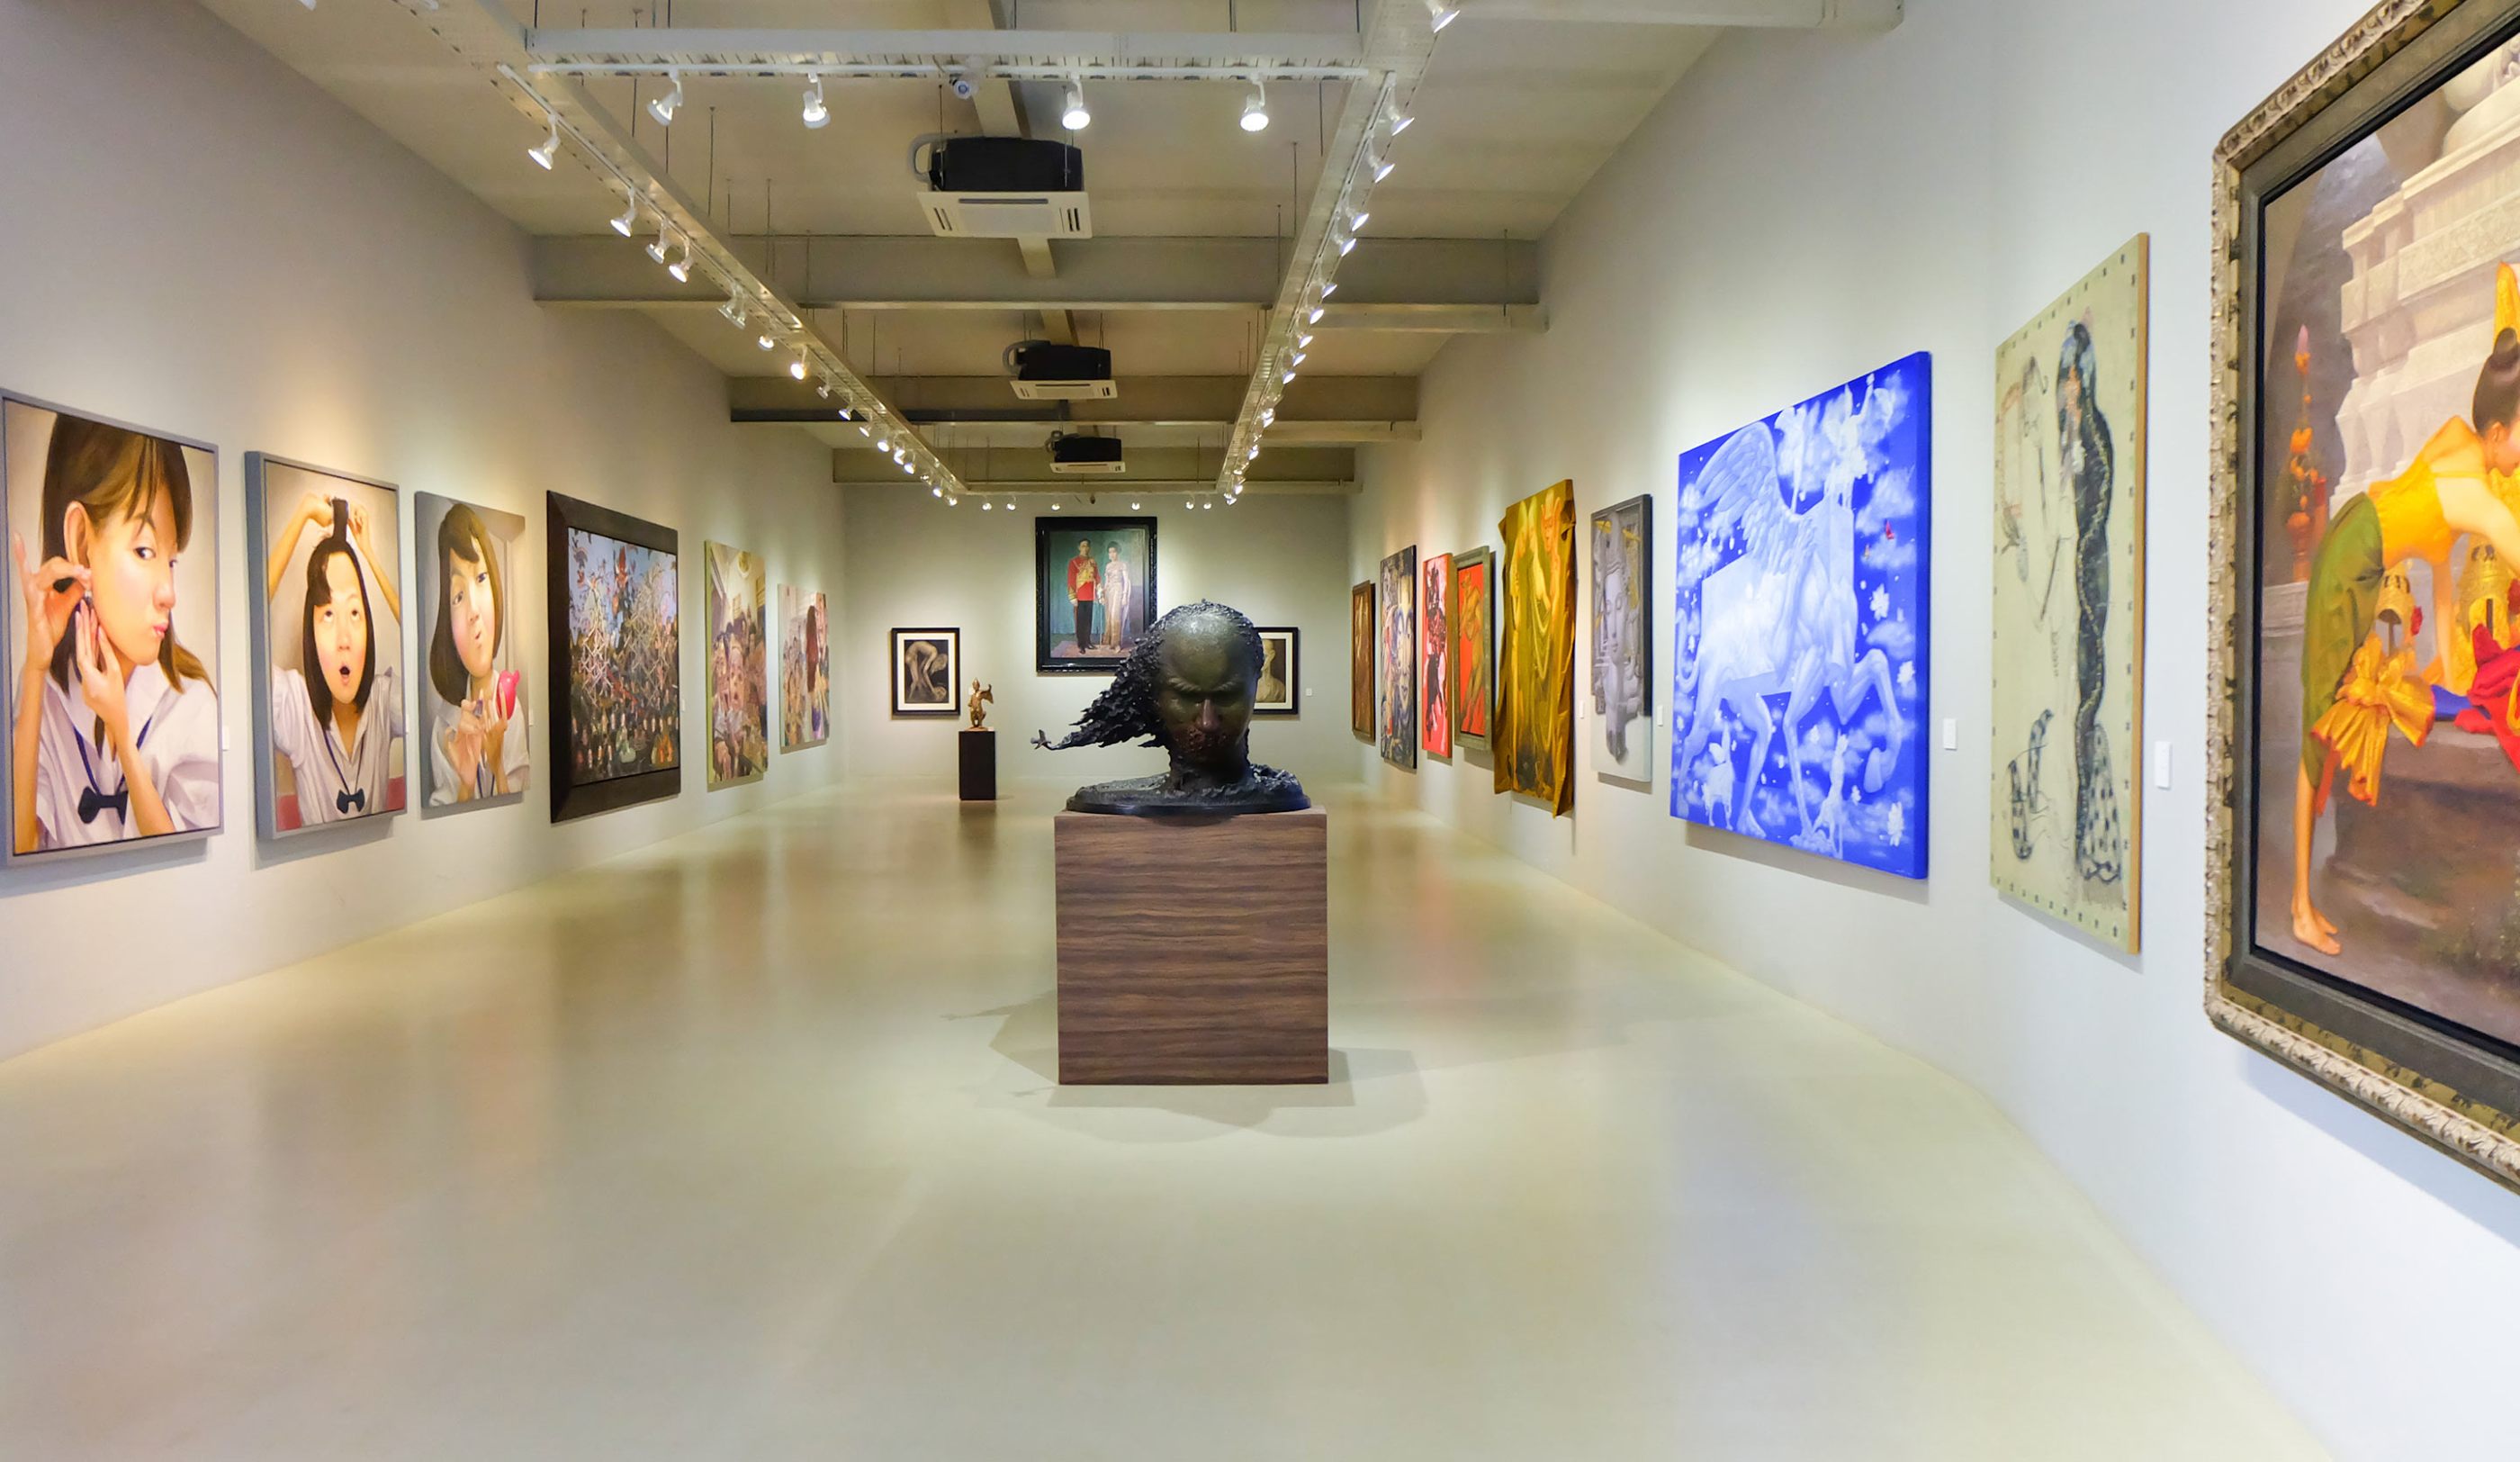 A wide museum hallway with paintings displayed on the walls